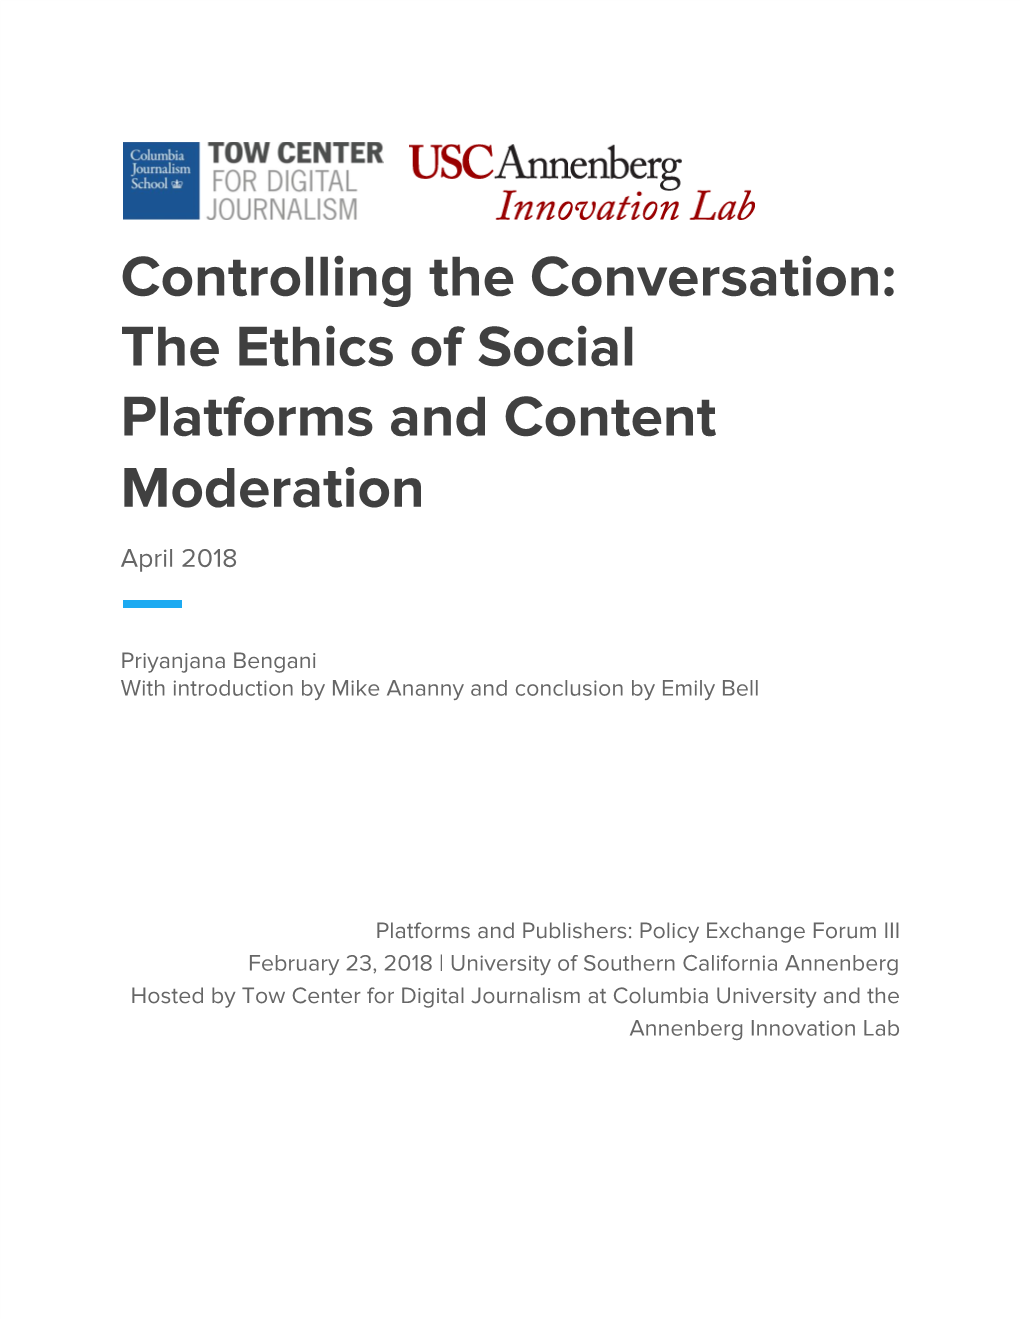 Controlling the Conversation: the Ethics of Social Platforms and Content Moderation